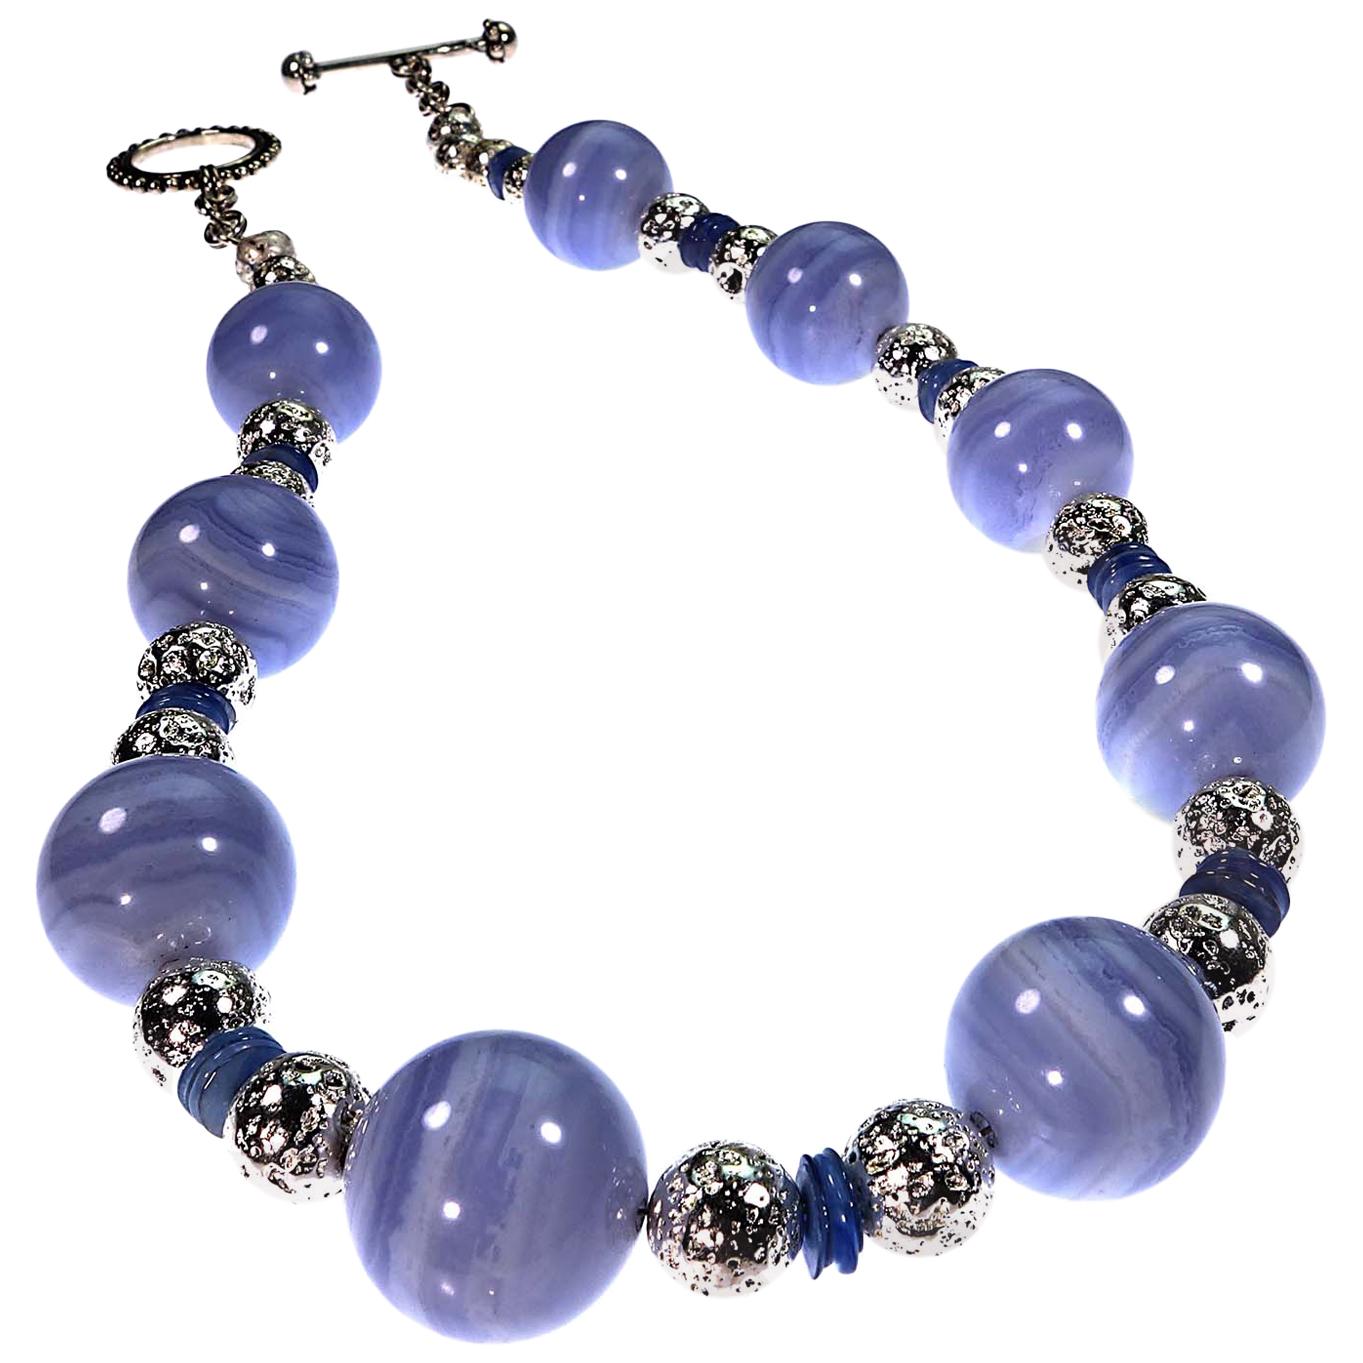 Stunning Blue Lace Agate Necklace